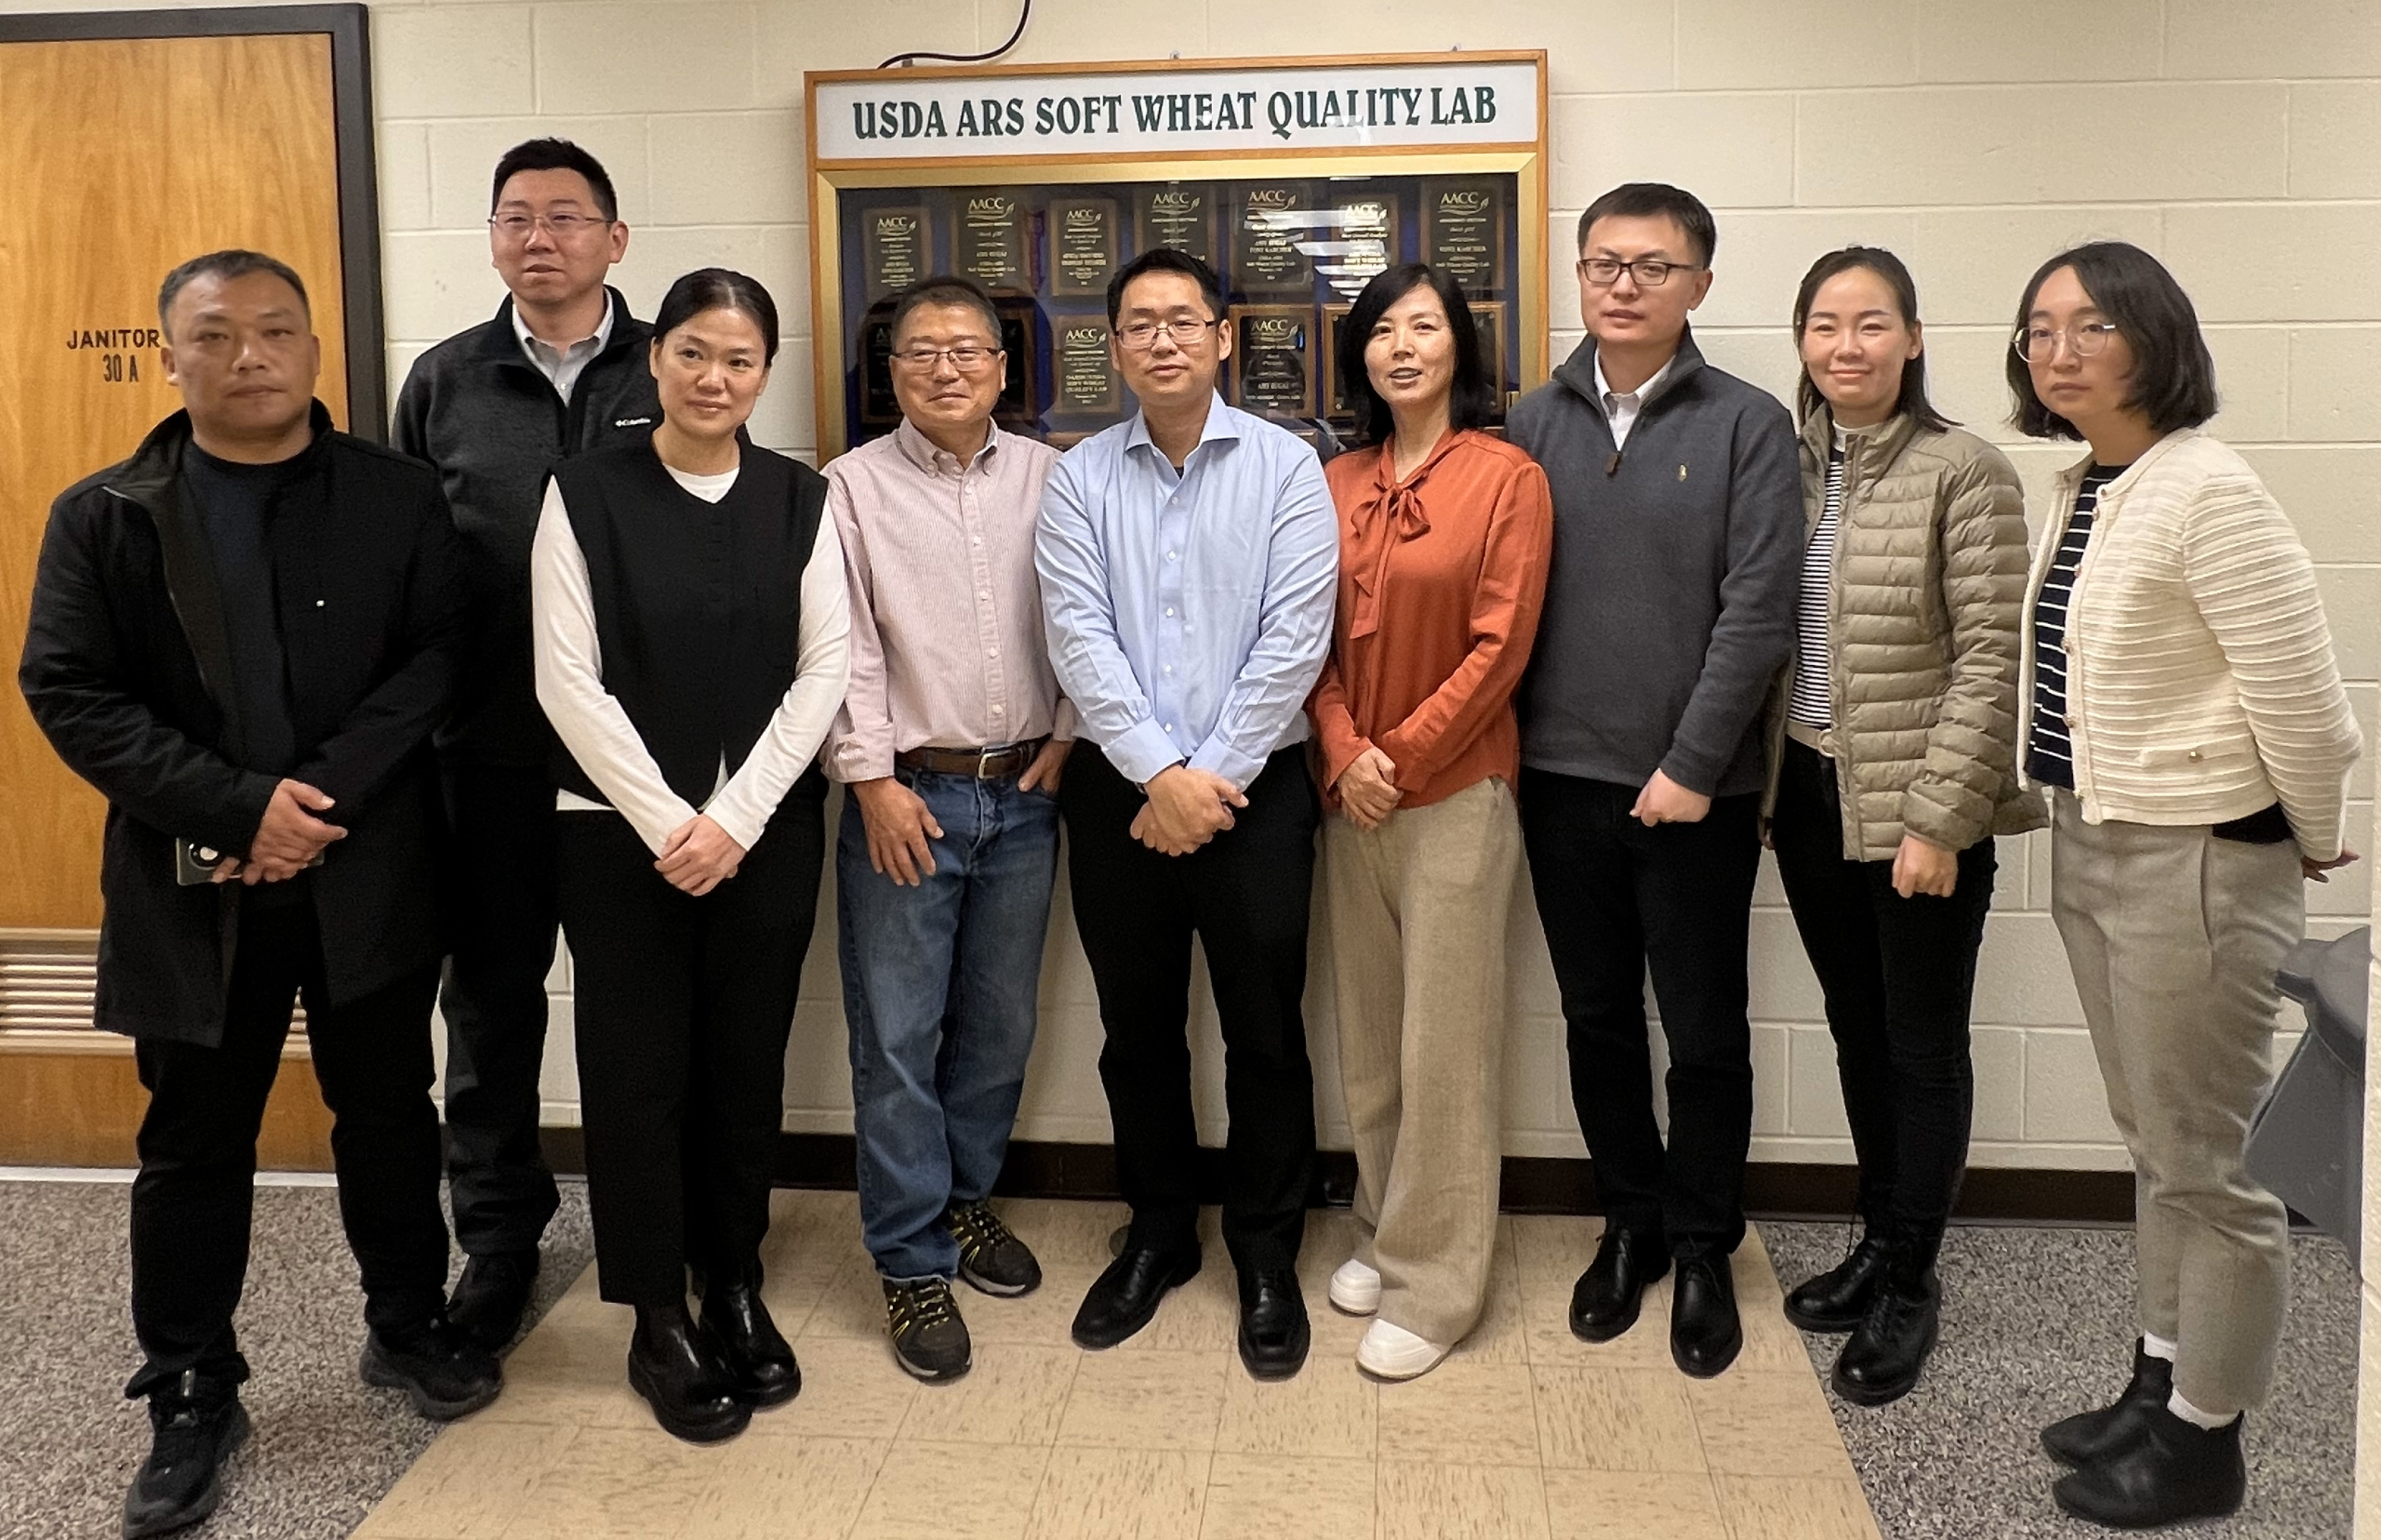 Several wheat buyers from China, Dr. Byung Kee Baik, USW staff stand in front of the directory at the ARS Soft Wheat Quality Lab in Wooster, Ohio.